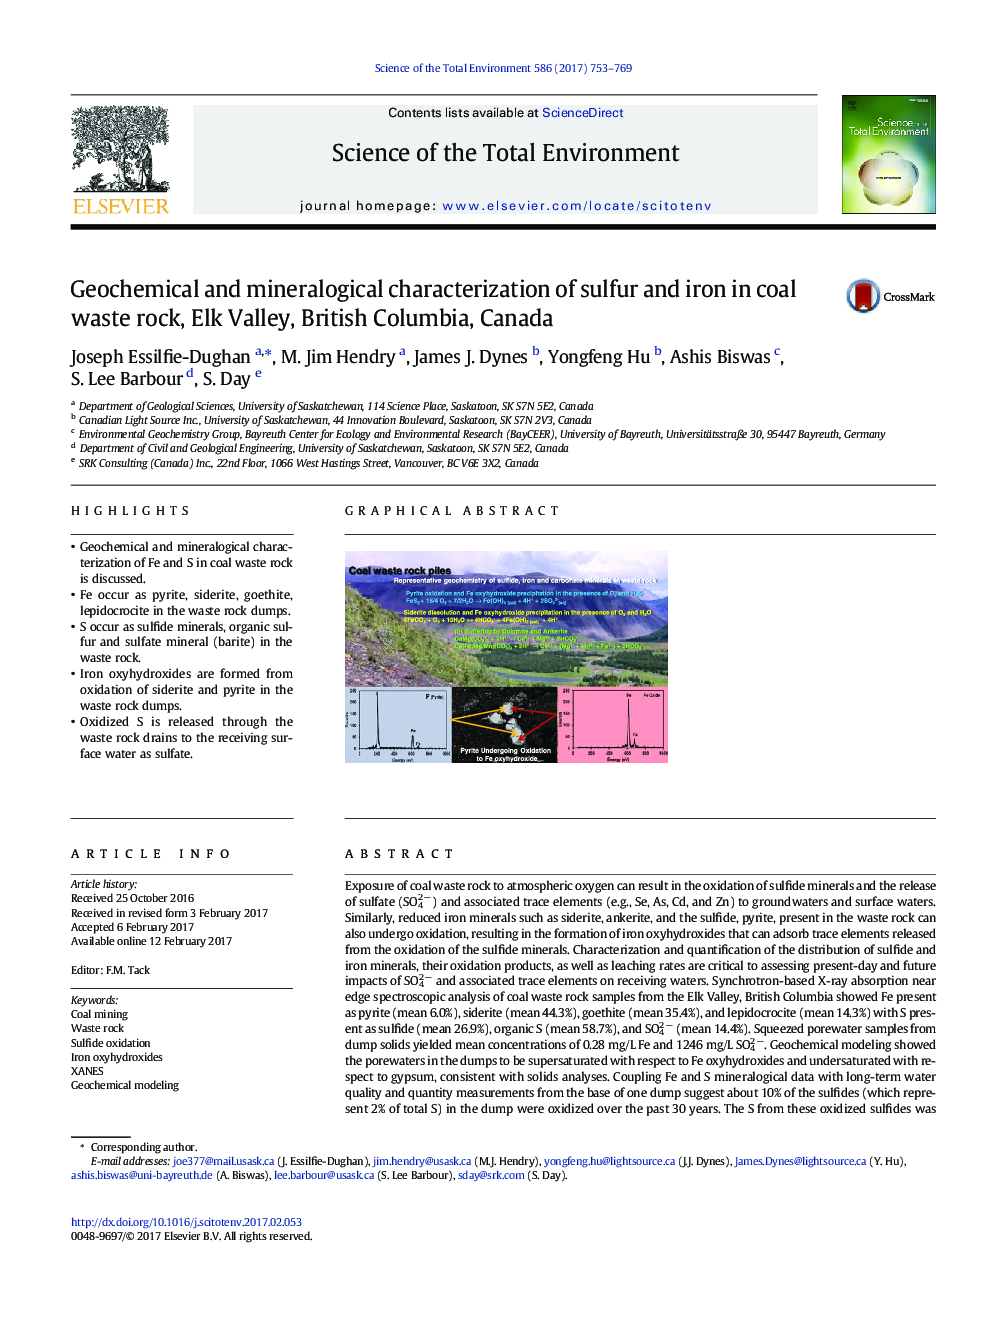 Geochemical and mineralogical characterization of sulfur and iron in coal waste rock, Elk Valley, British Columbia, Canada